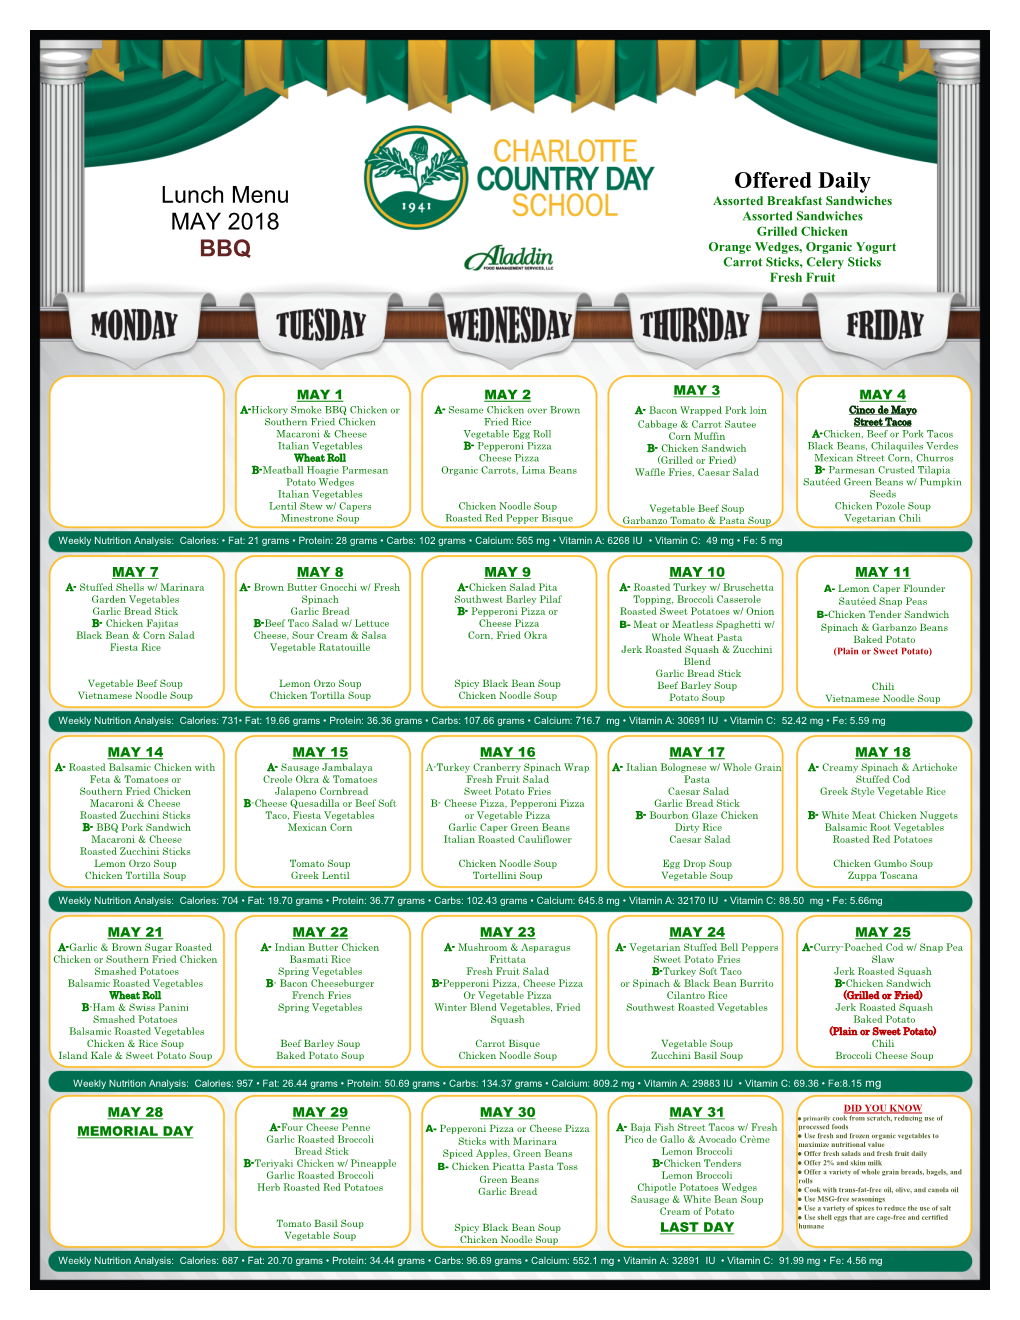 Lunch Menu MAY 2018 BBQ Offered Daily